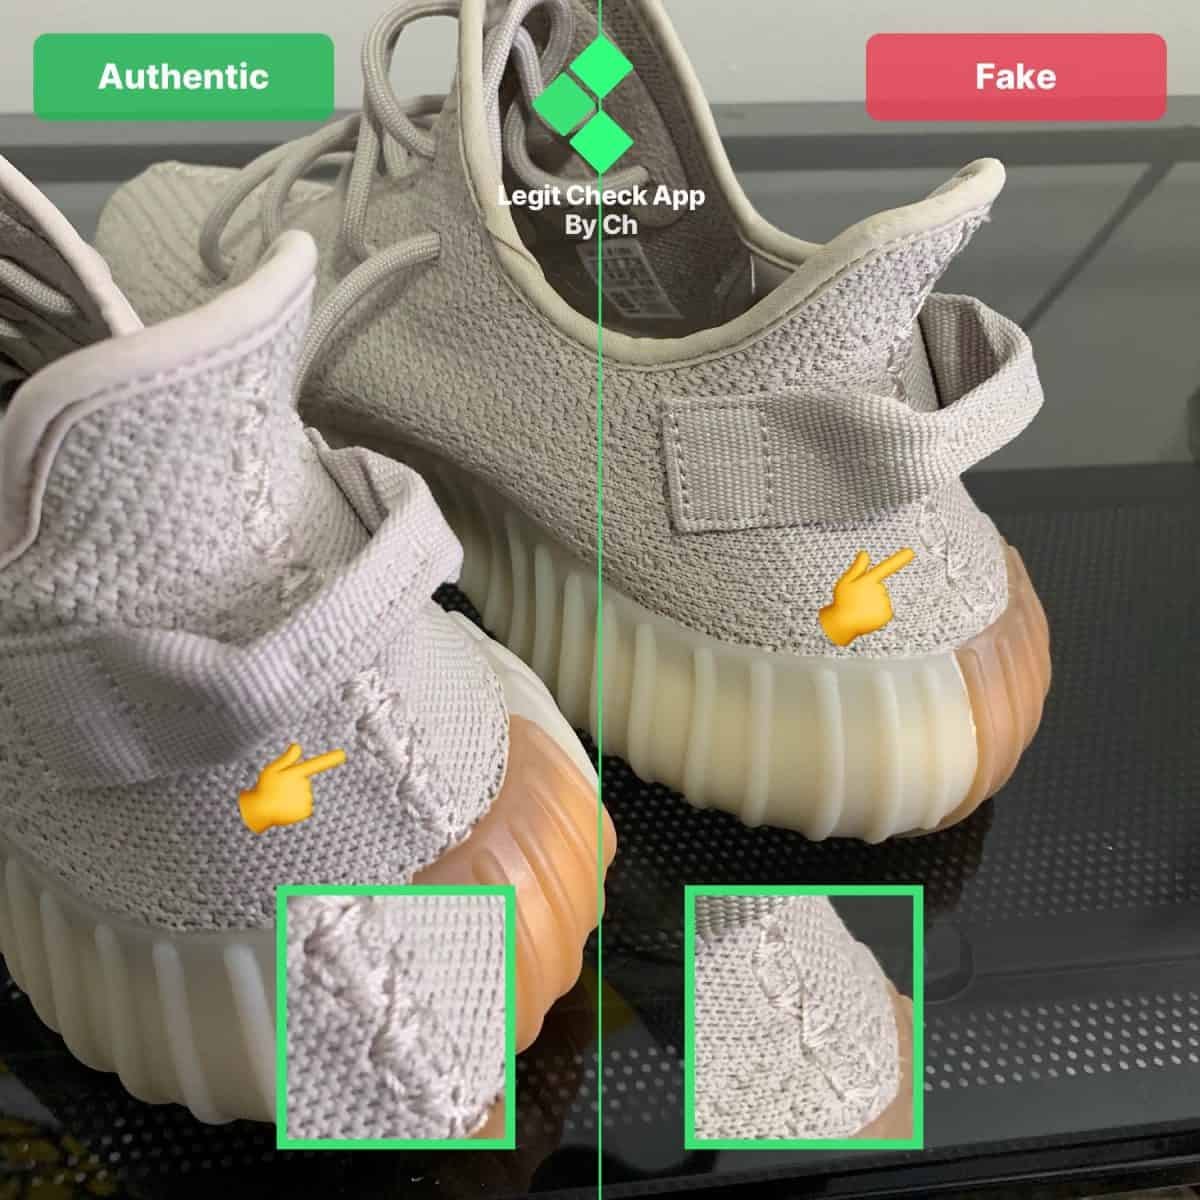 yeezy shoes fake vs real